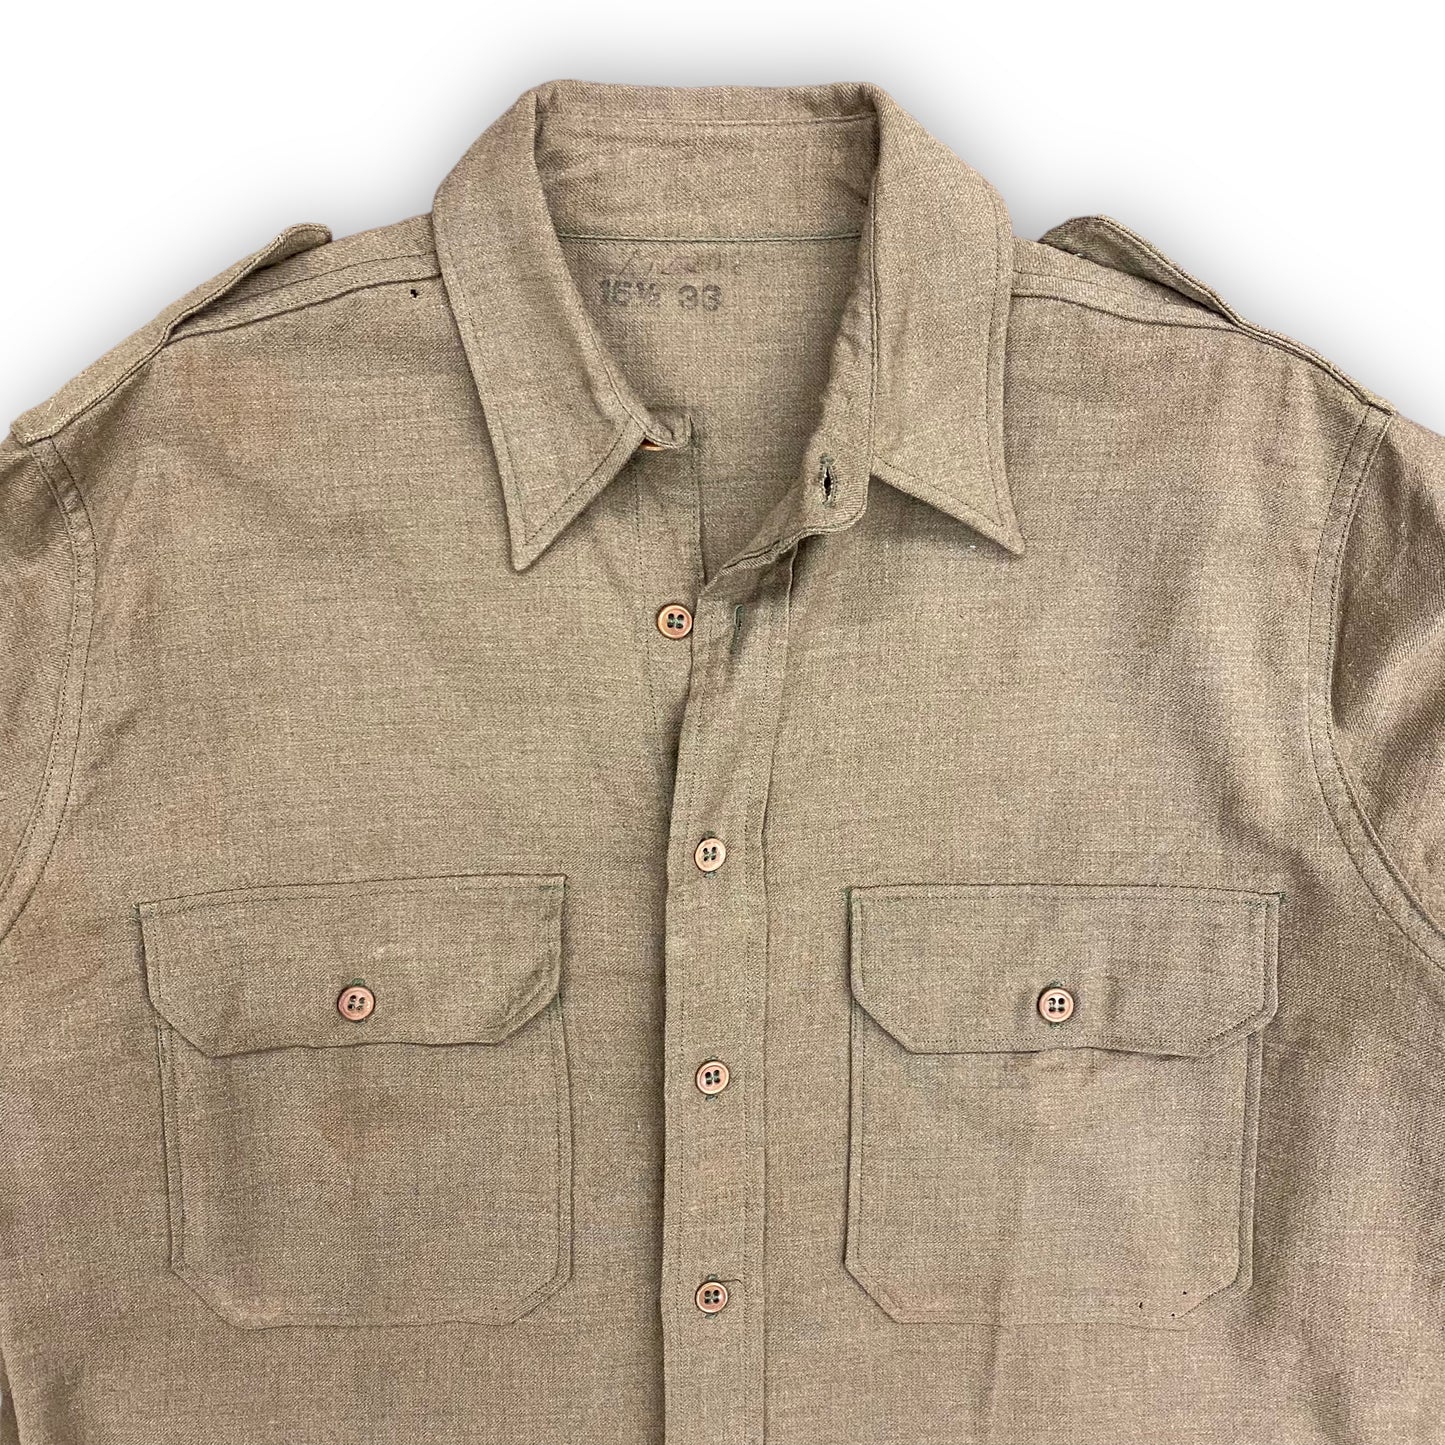 1930's/1940's Military Button Up Wool Shirt - Size Large (16.5)